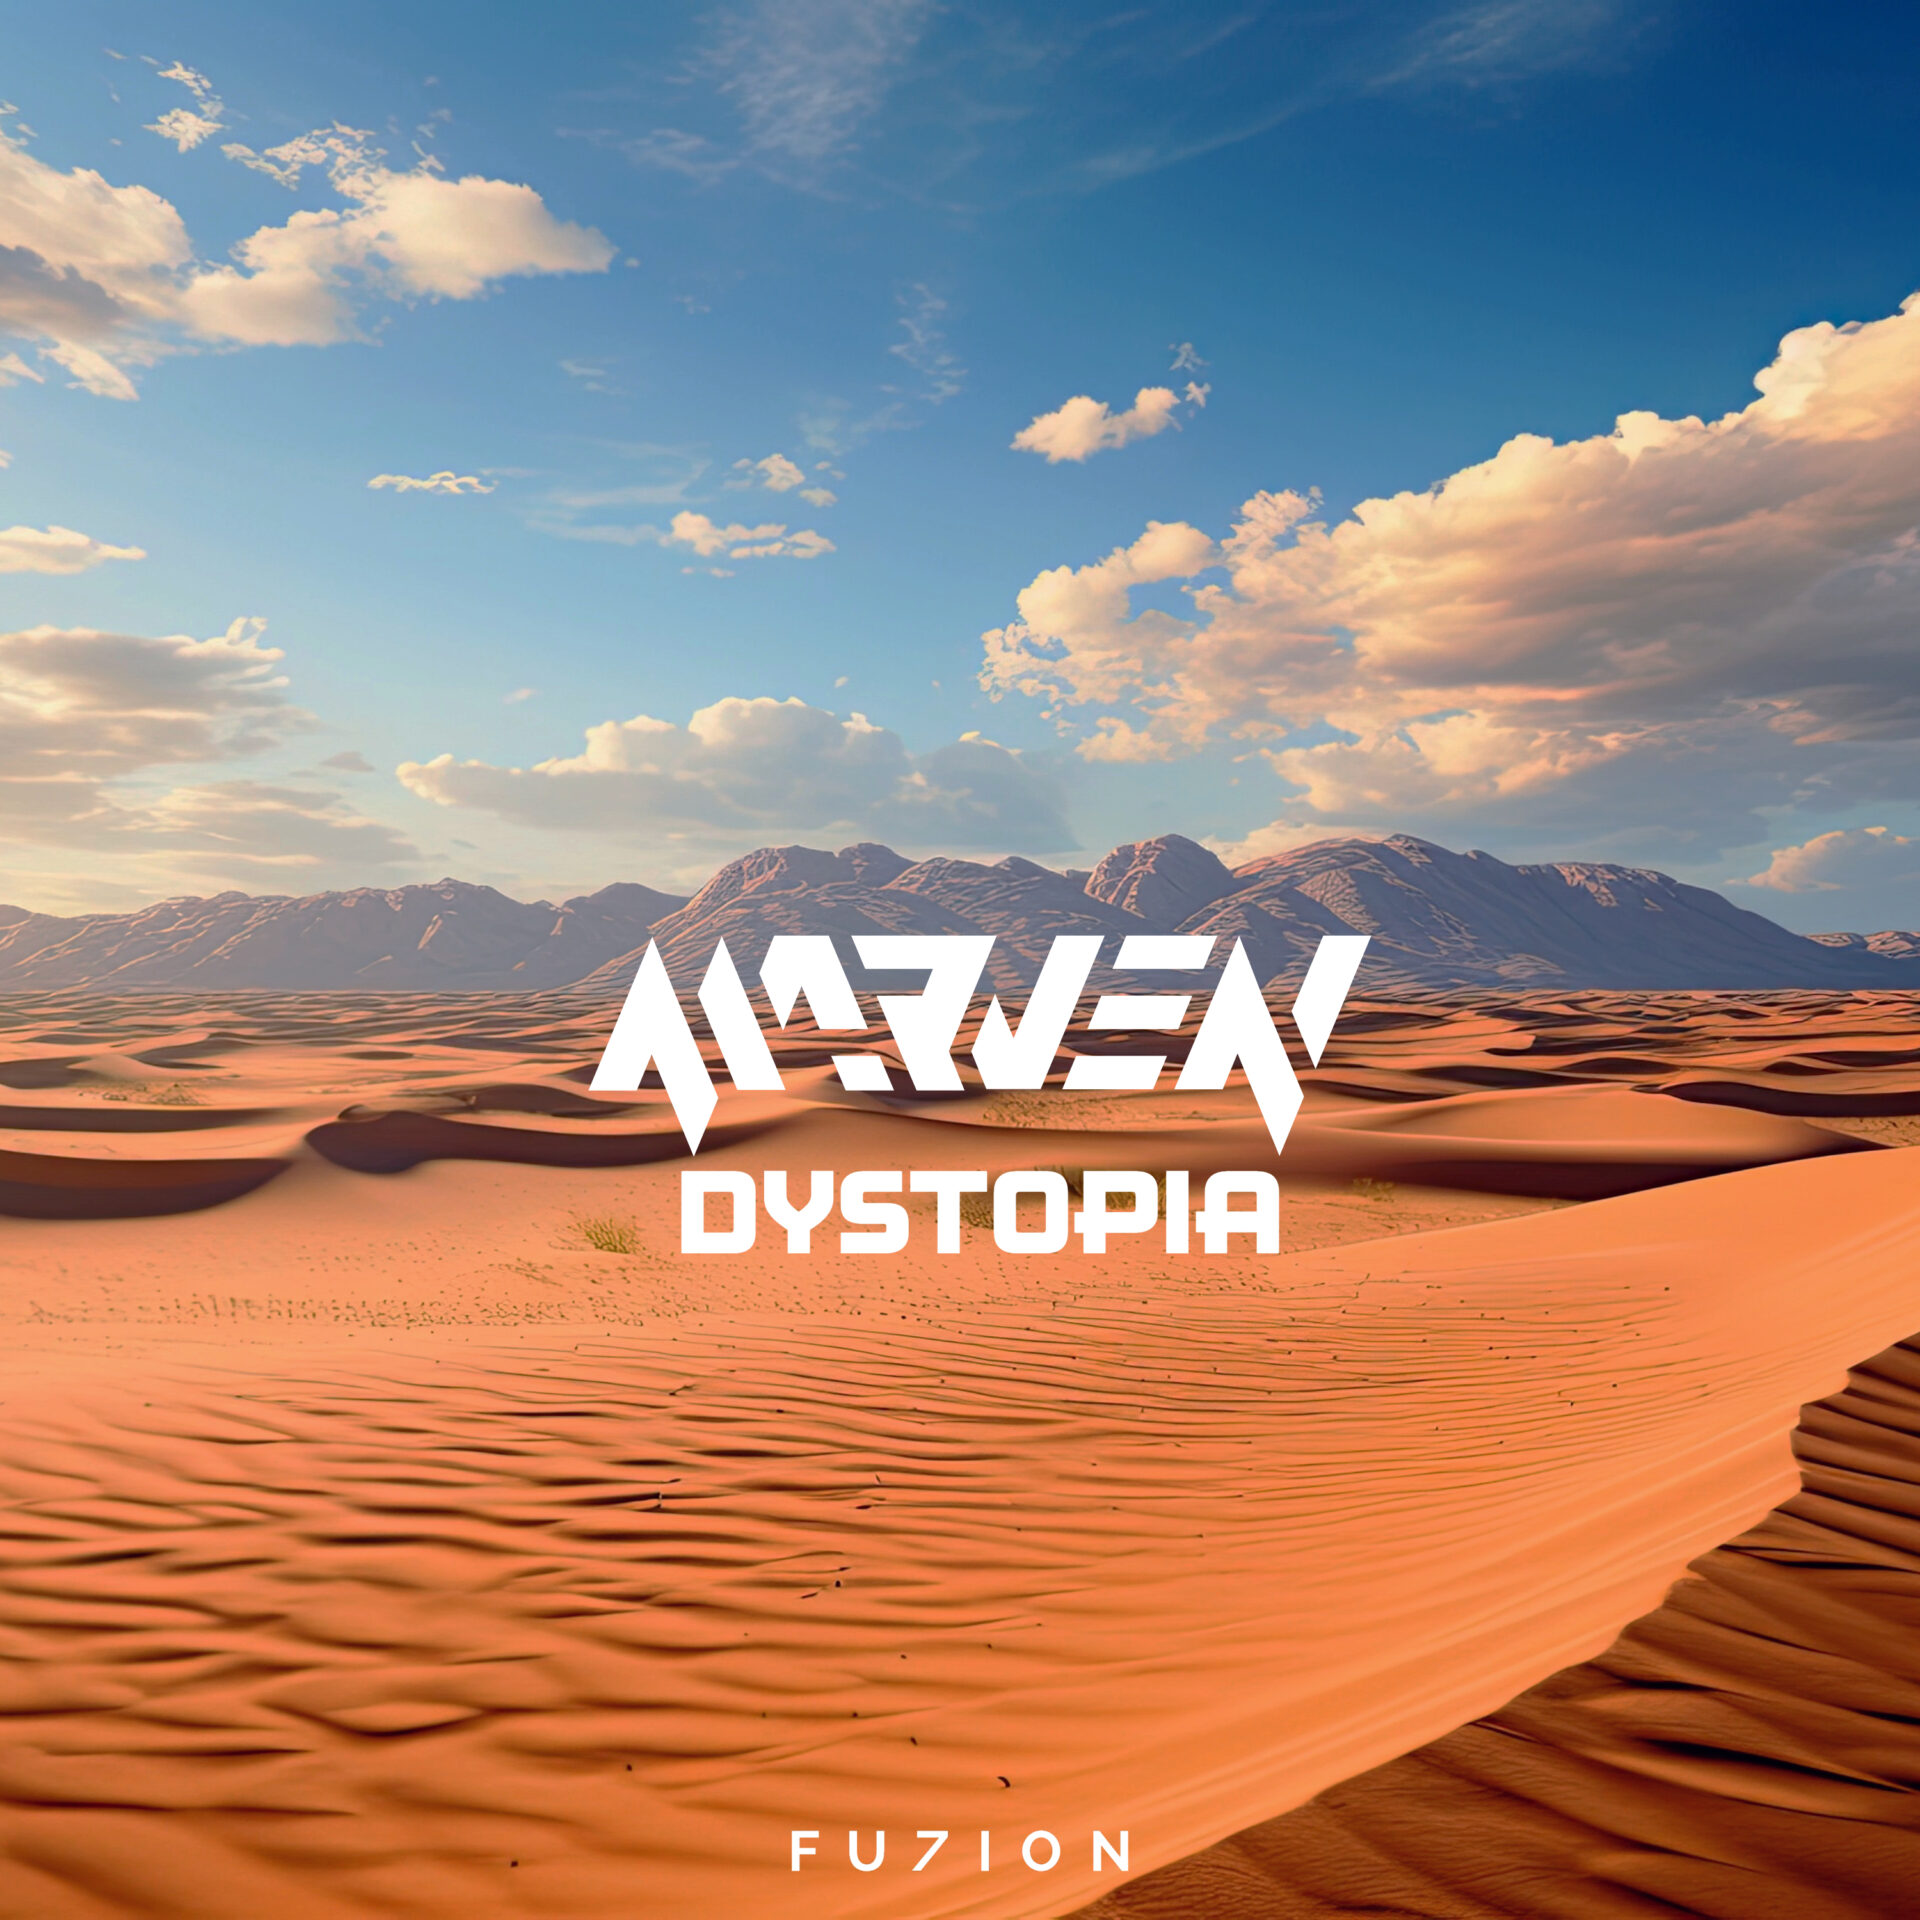 Marven releases Dystopia